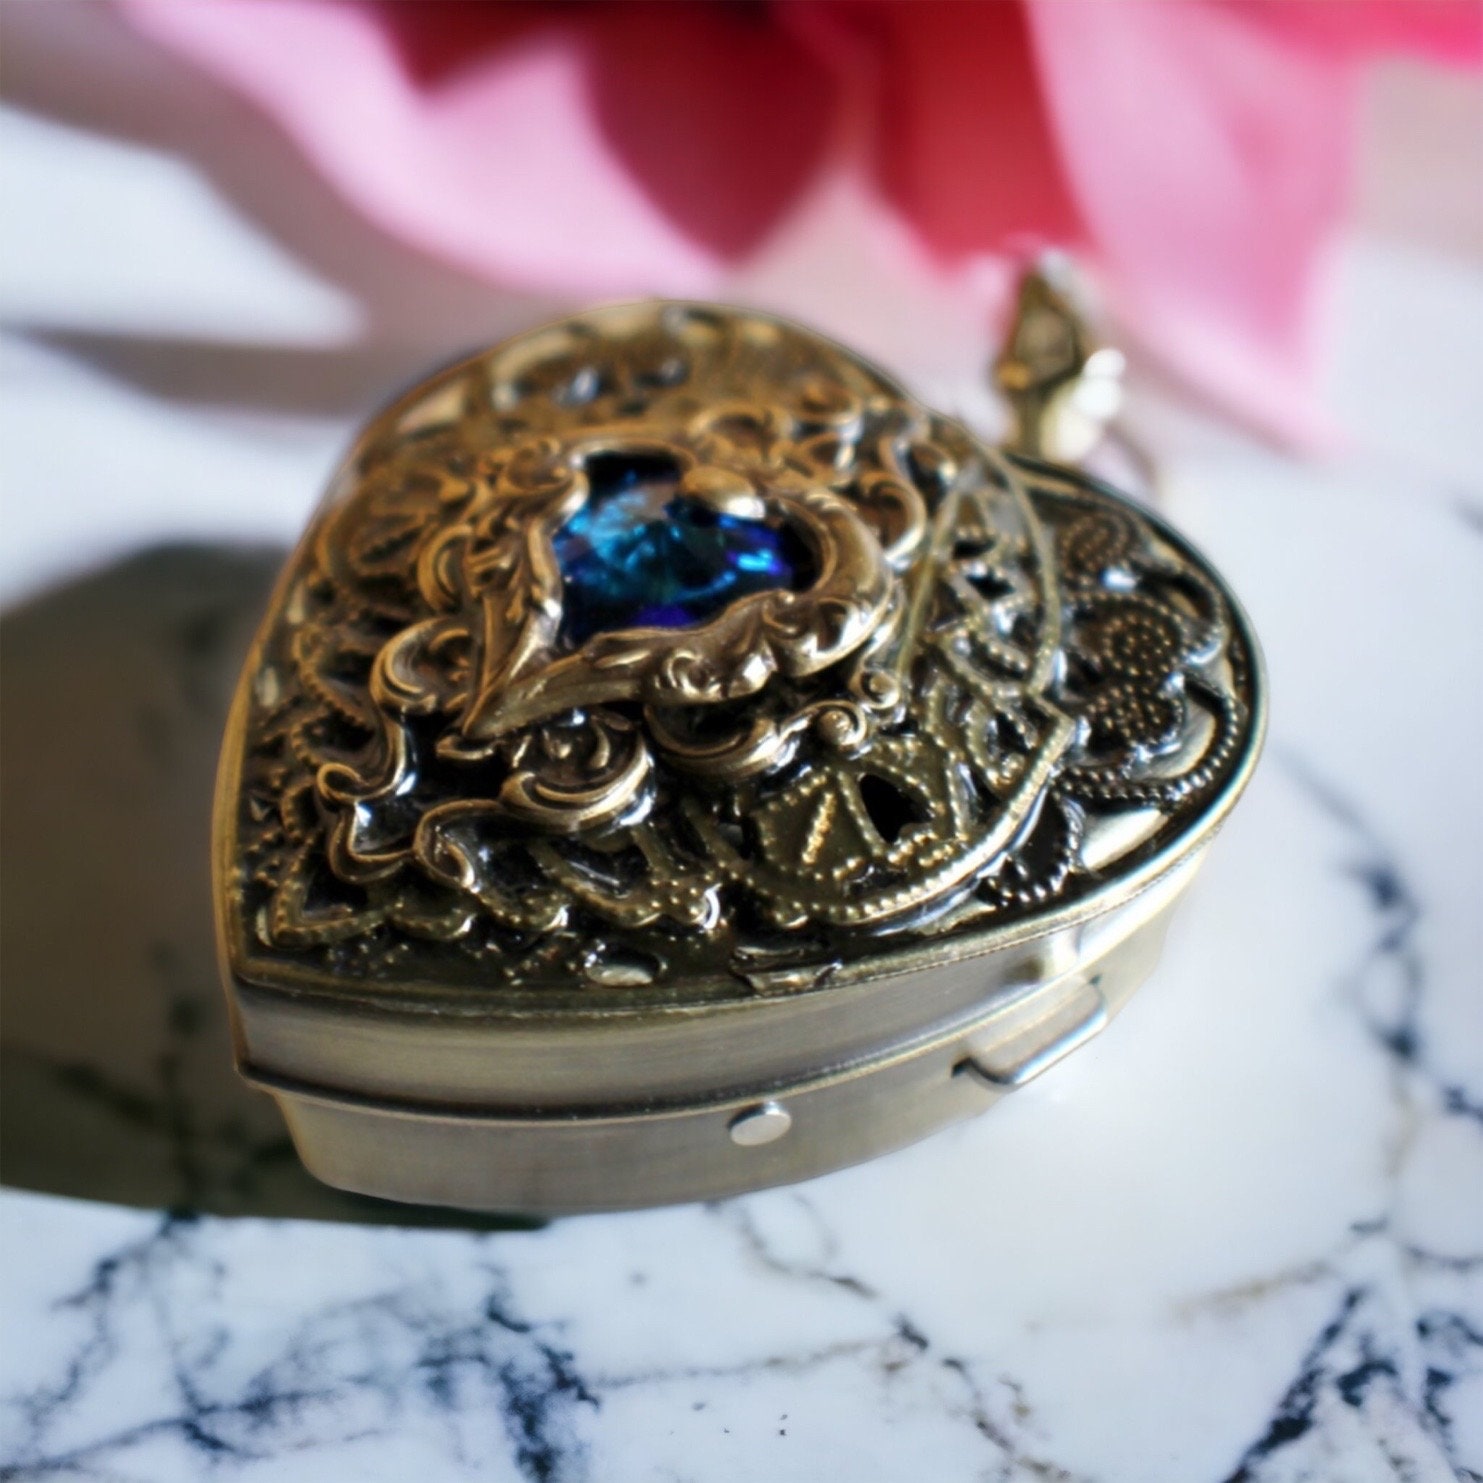 Buy Heart Music Box Locket, Heart Shaped Locket With Music Box Inside, in  Bronze With Blue Crystal Heart. Online in India - Etsy